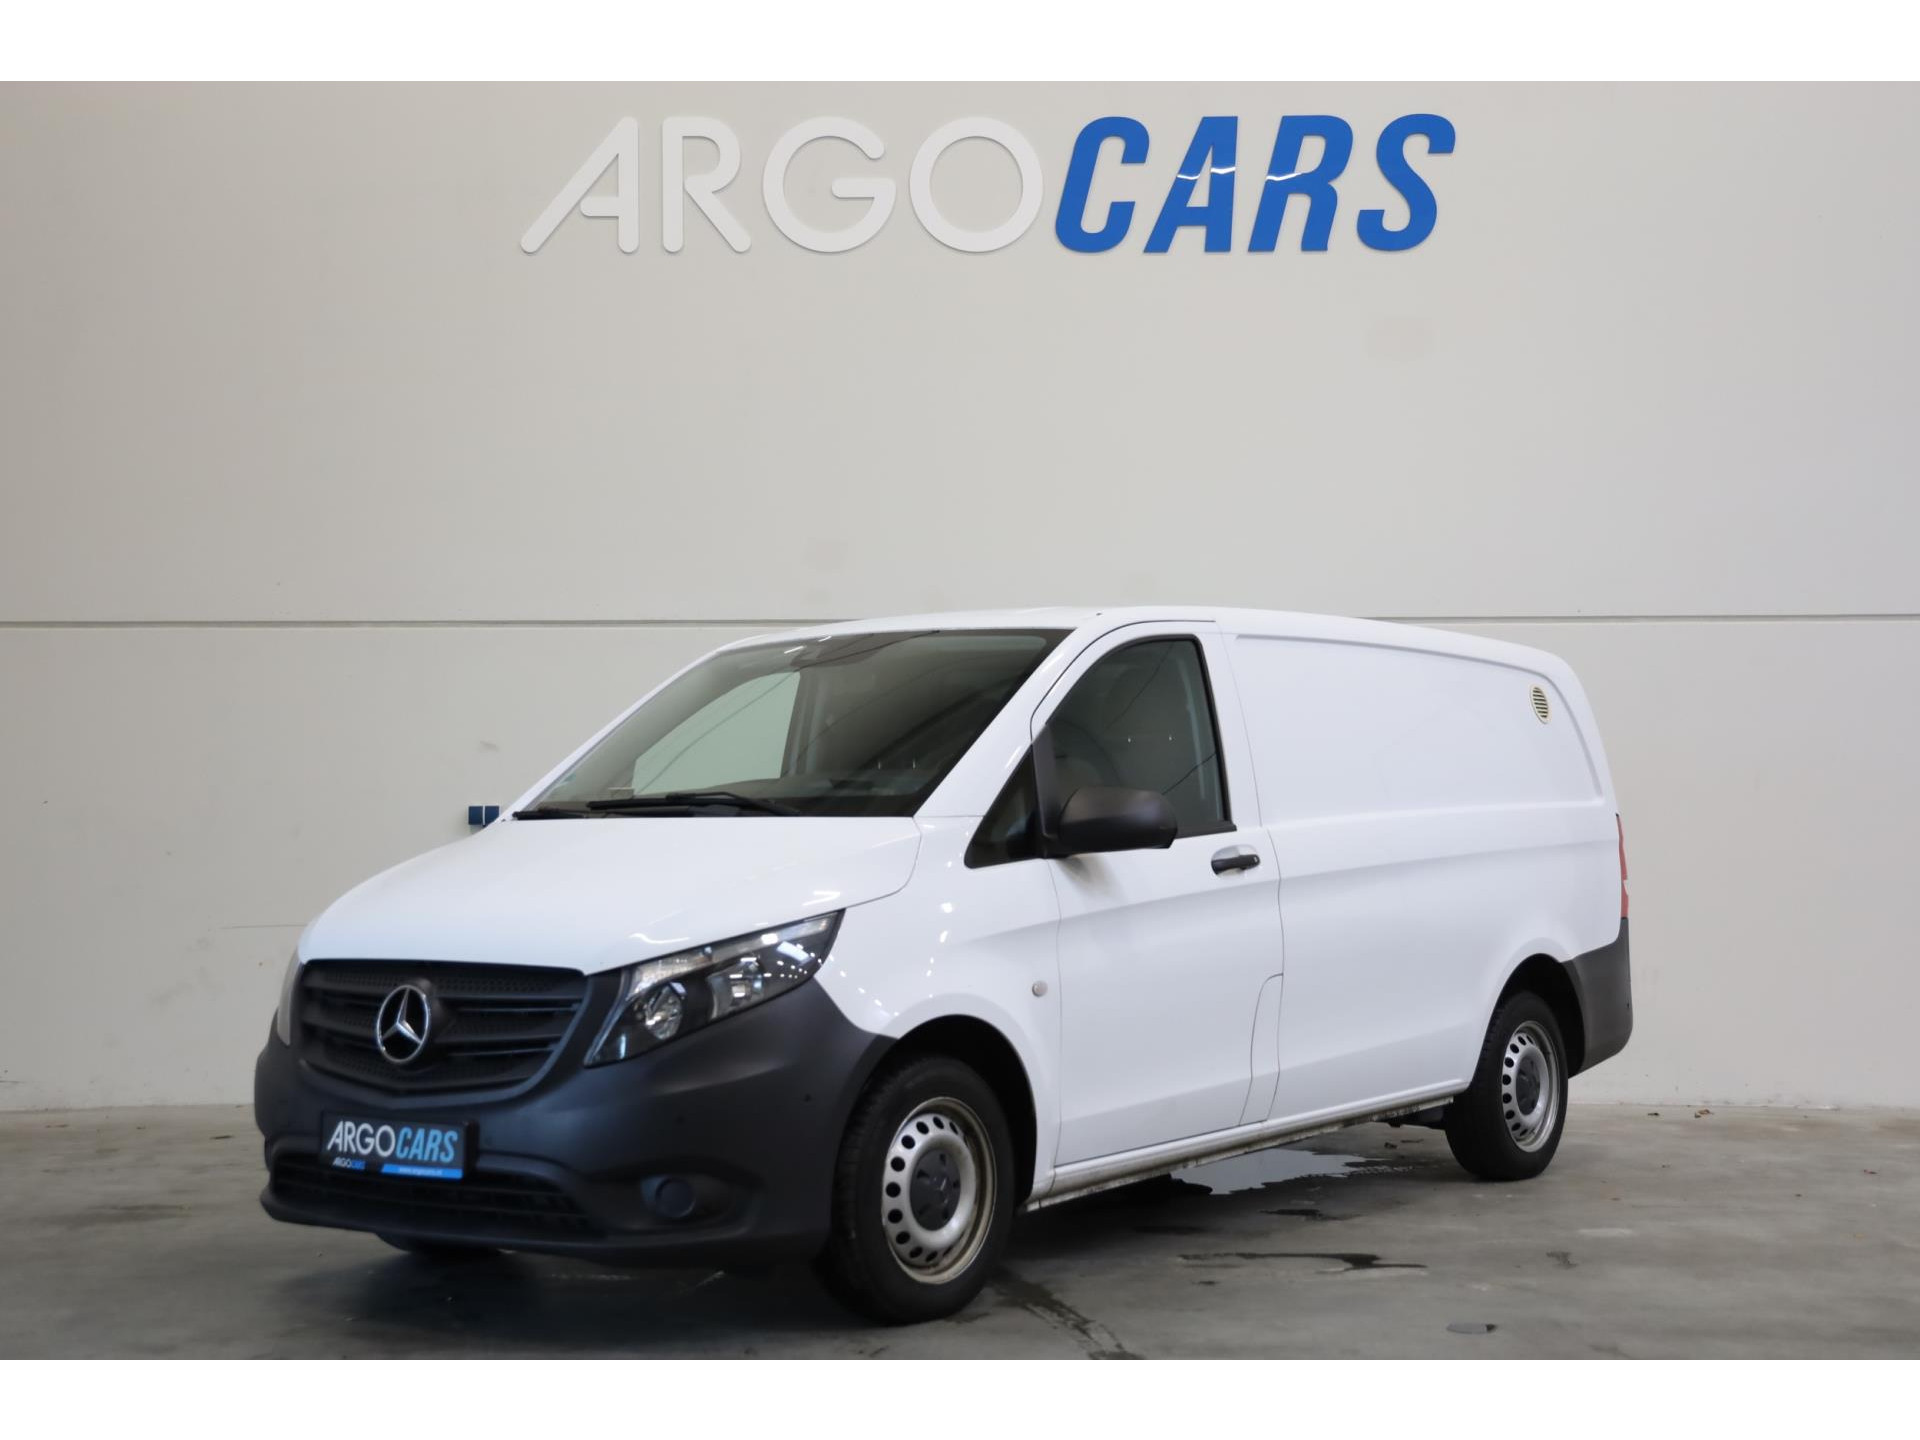 Mercedes-Benz Vito 114 CDI LANG AUTOMAAT CLIMA CRUISE CONTROL PDC VOOR+ACHTER 3 ZITS LEASE V/A € 144 P.M. INRUIL MOG Bestelauto